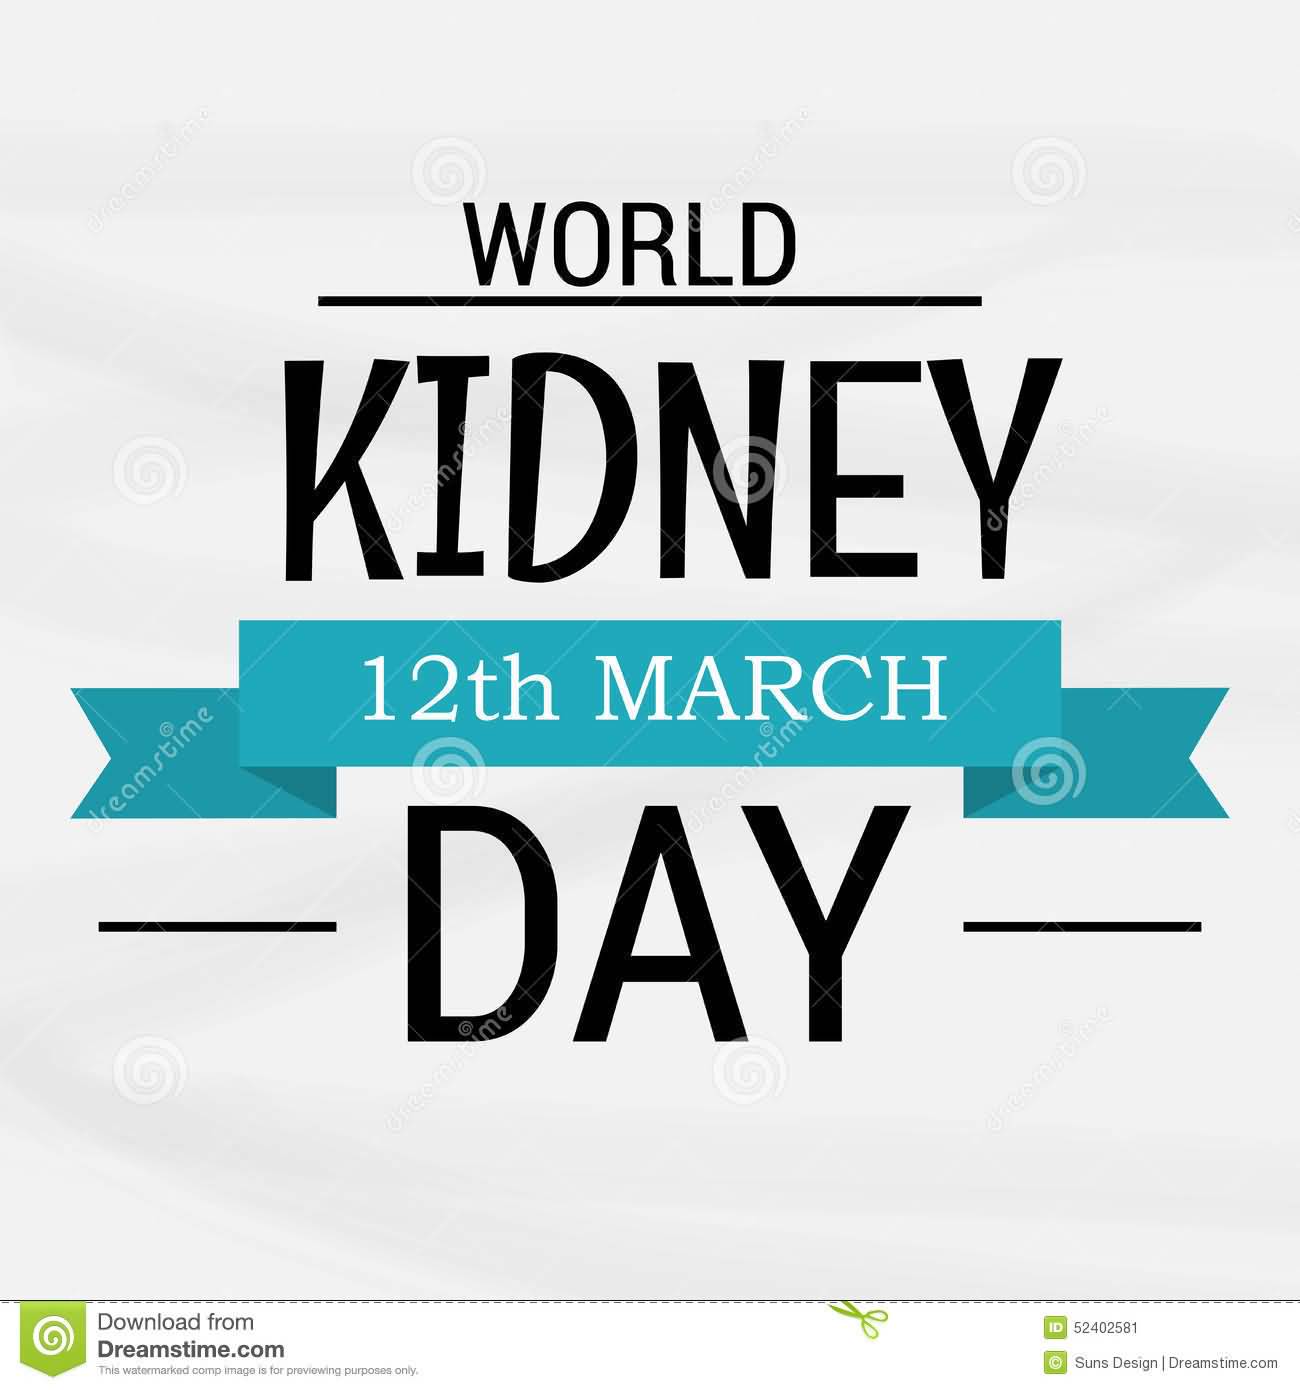 World Kidney Day 12th March